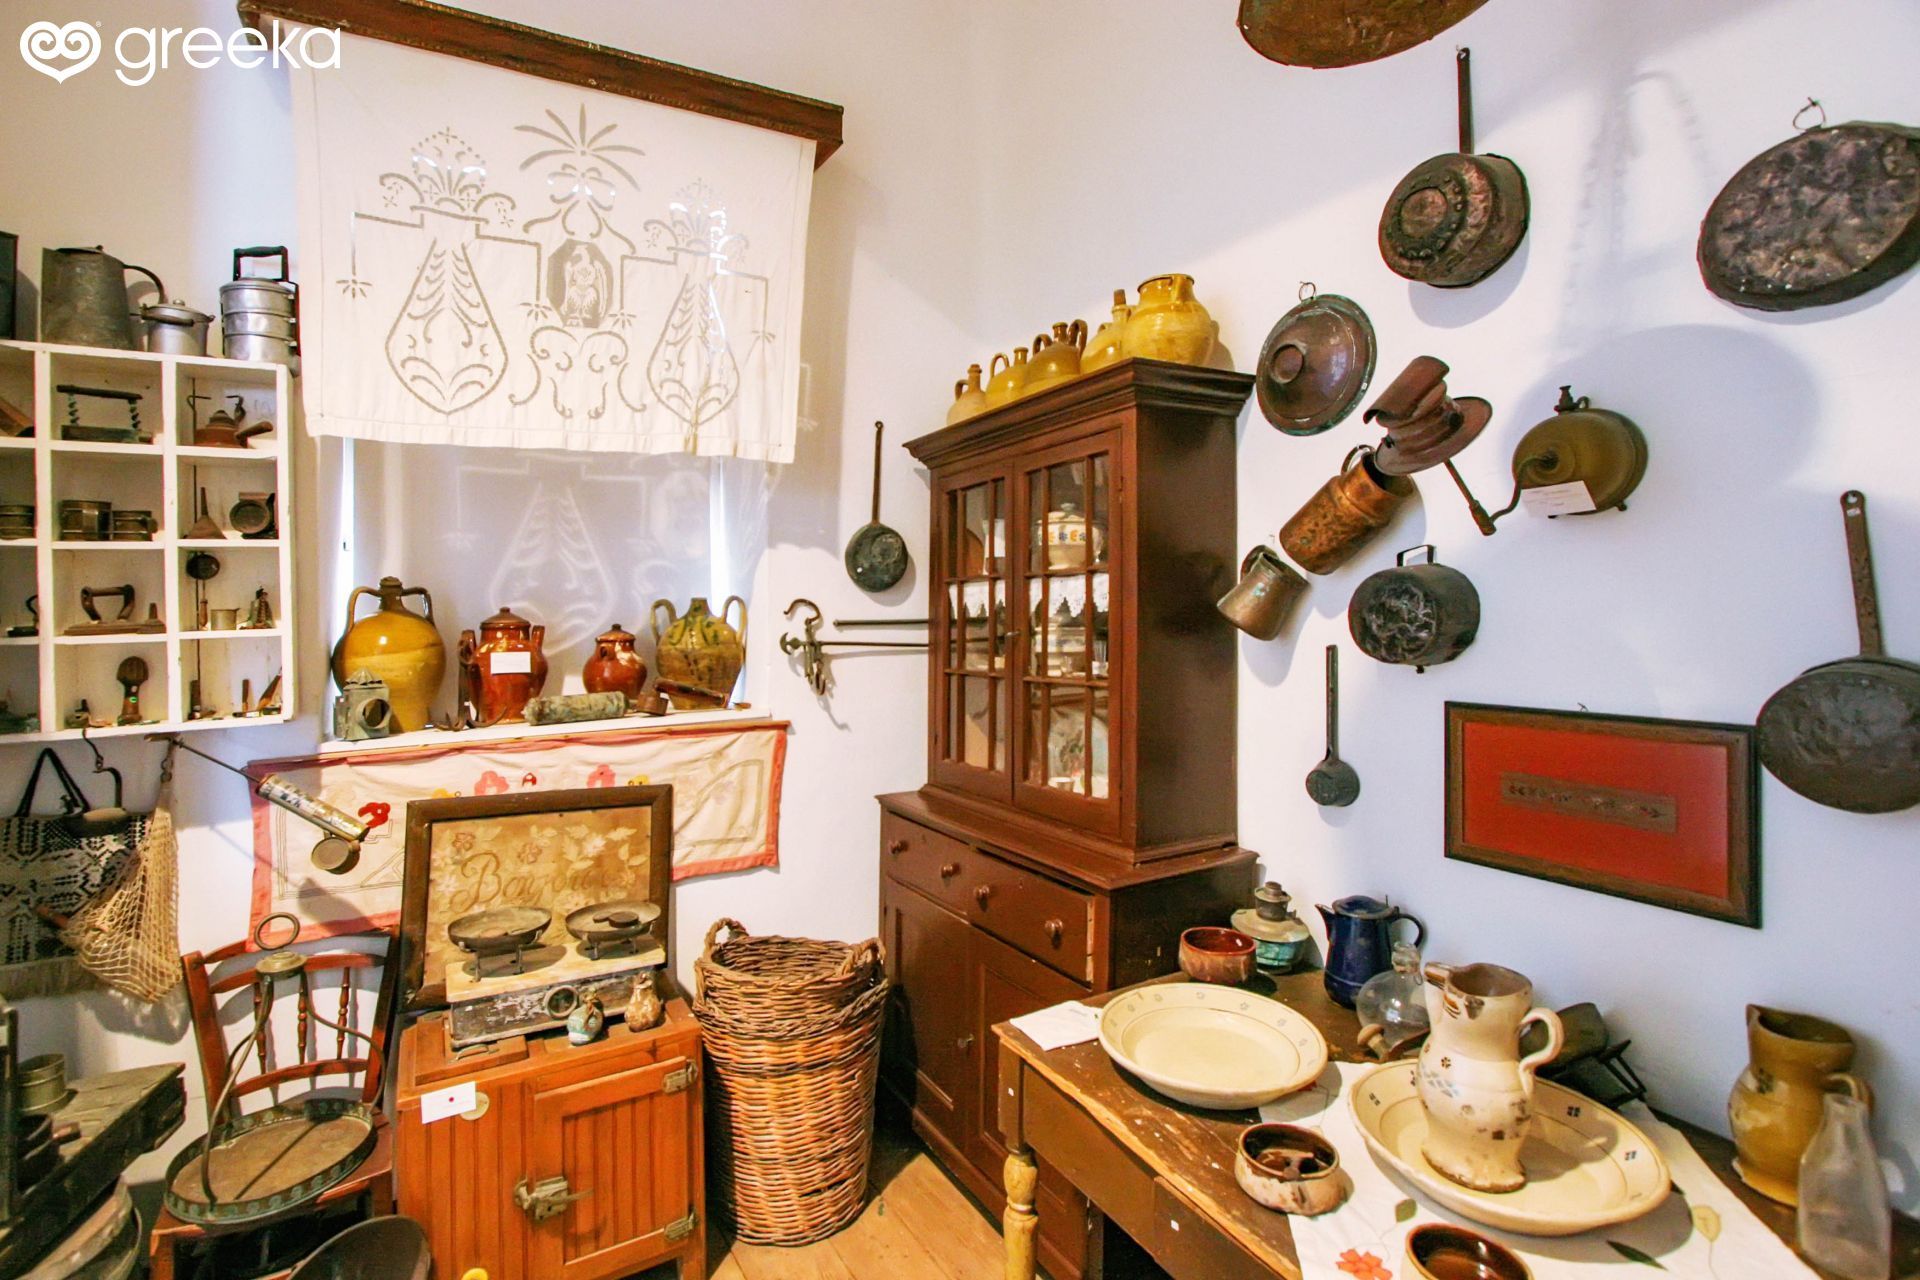 Photos of Folklore Museum in Paxi - Page 1 | Greeka.com